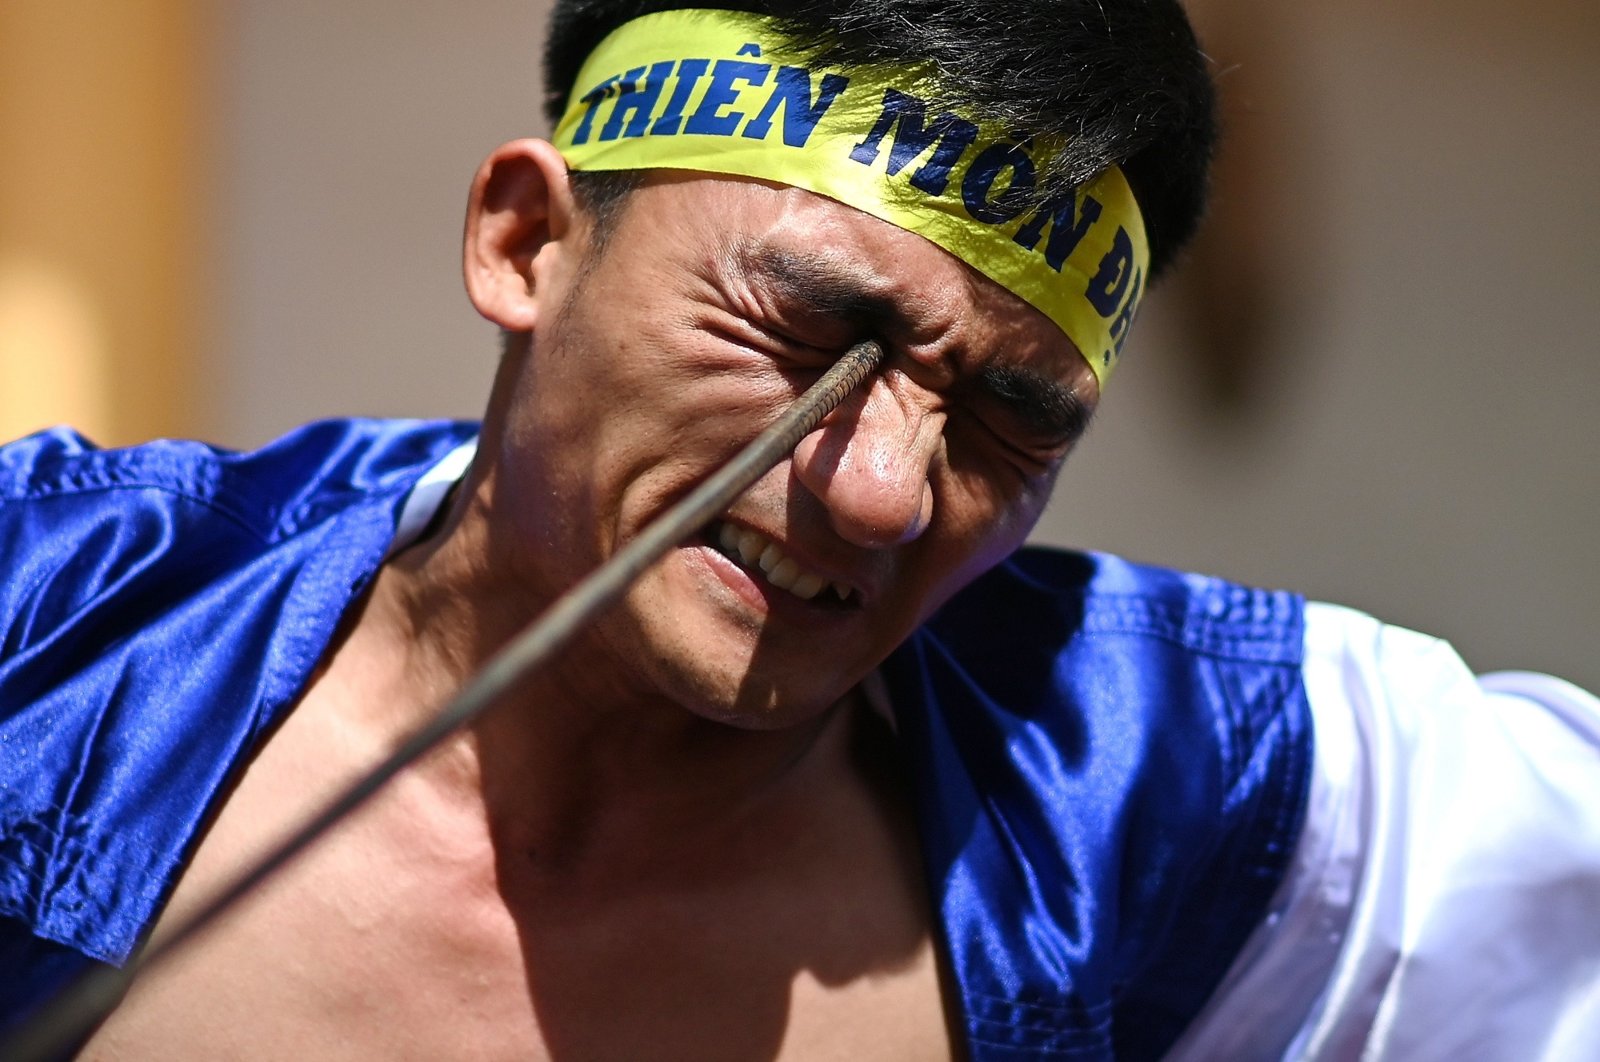 Le Van Thang, 28, a student of the centuries-old martial art of Thien Mon Dao, bends a construction rebar against his eye socket inside the Bach Linh temple compound at Du Xa Thuong village in Hanoi, Vietnam, June 7, 2020. (AFP Photo)